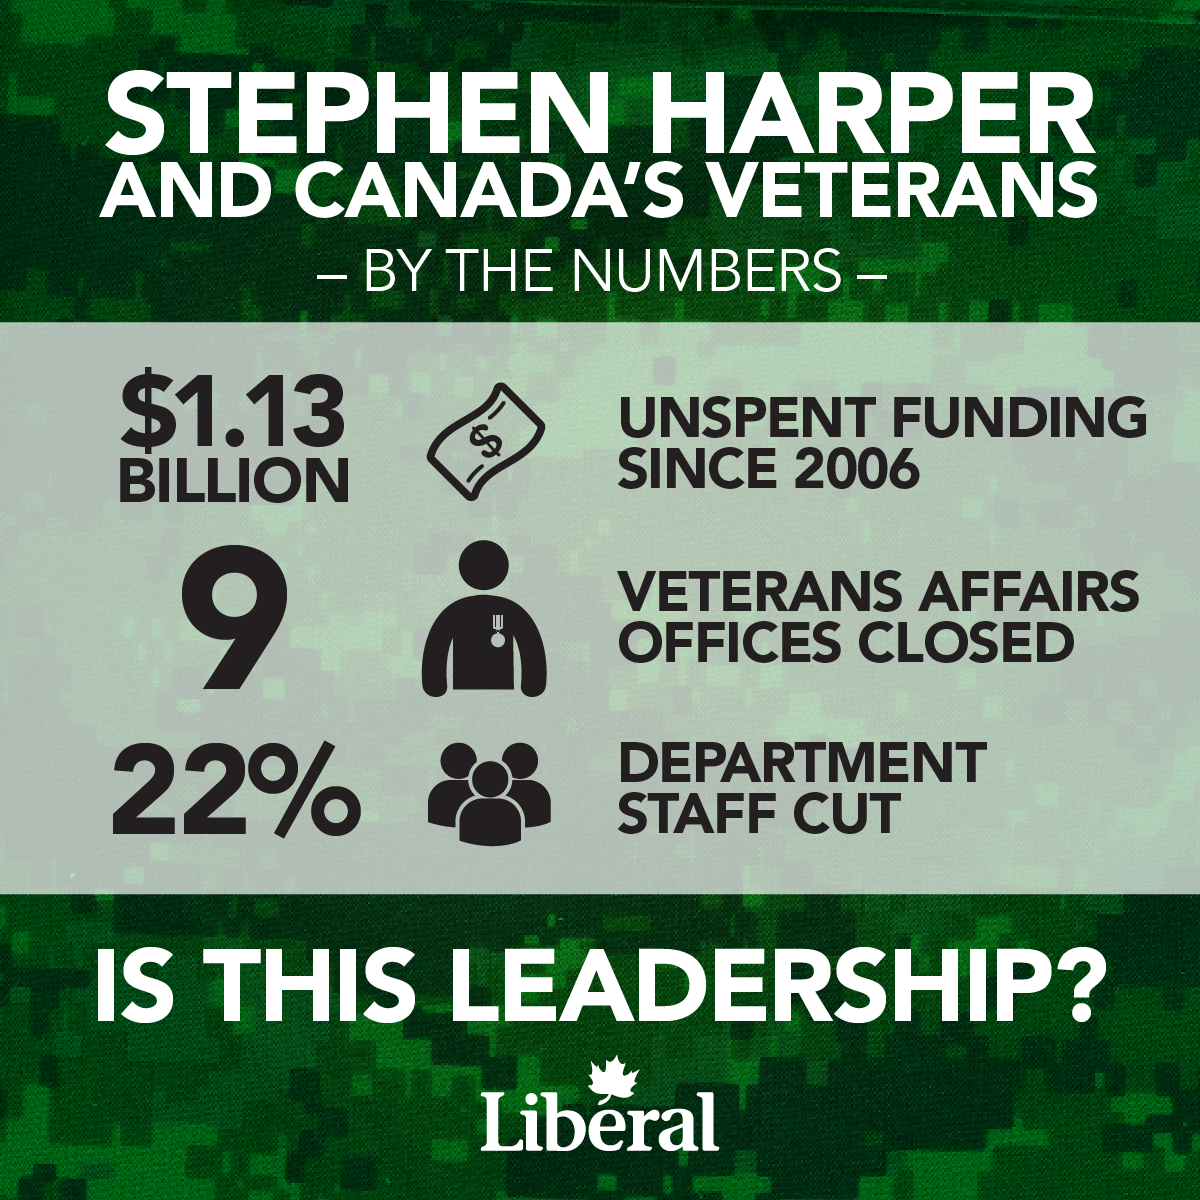 Stephen Harper and Canada’s veterans. By the numbers: $1.13 Billion in Unspent funding since 2006. 9 Veterans Affairs offices closed. 22% Department staff cuts. Is this leadership?